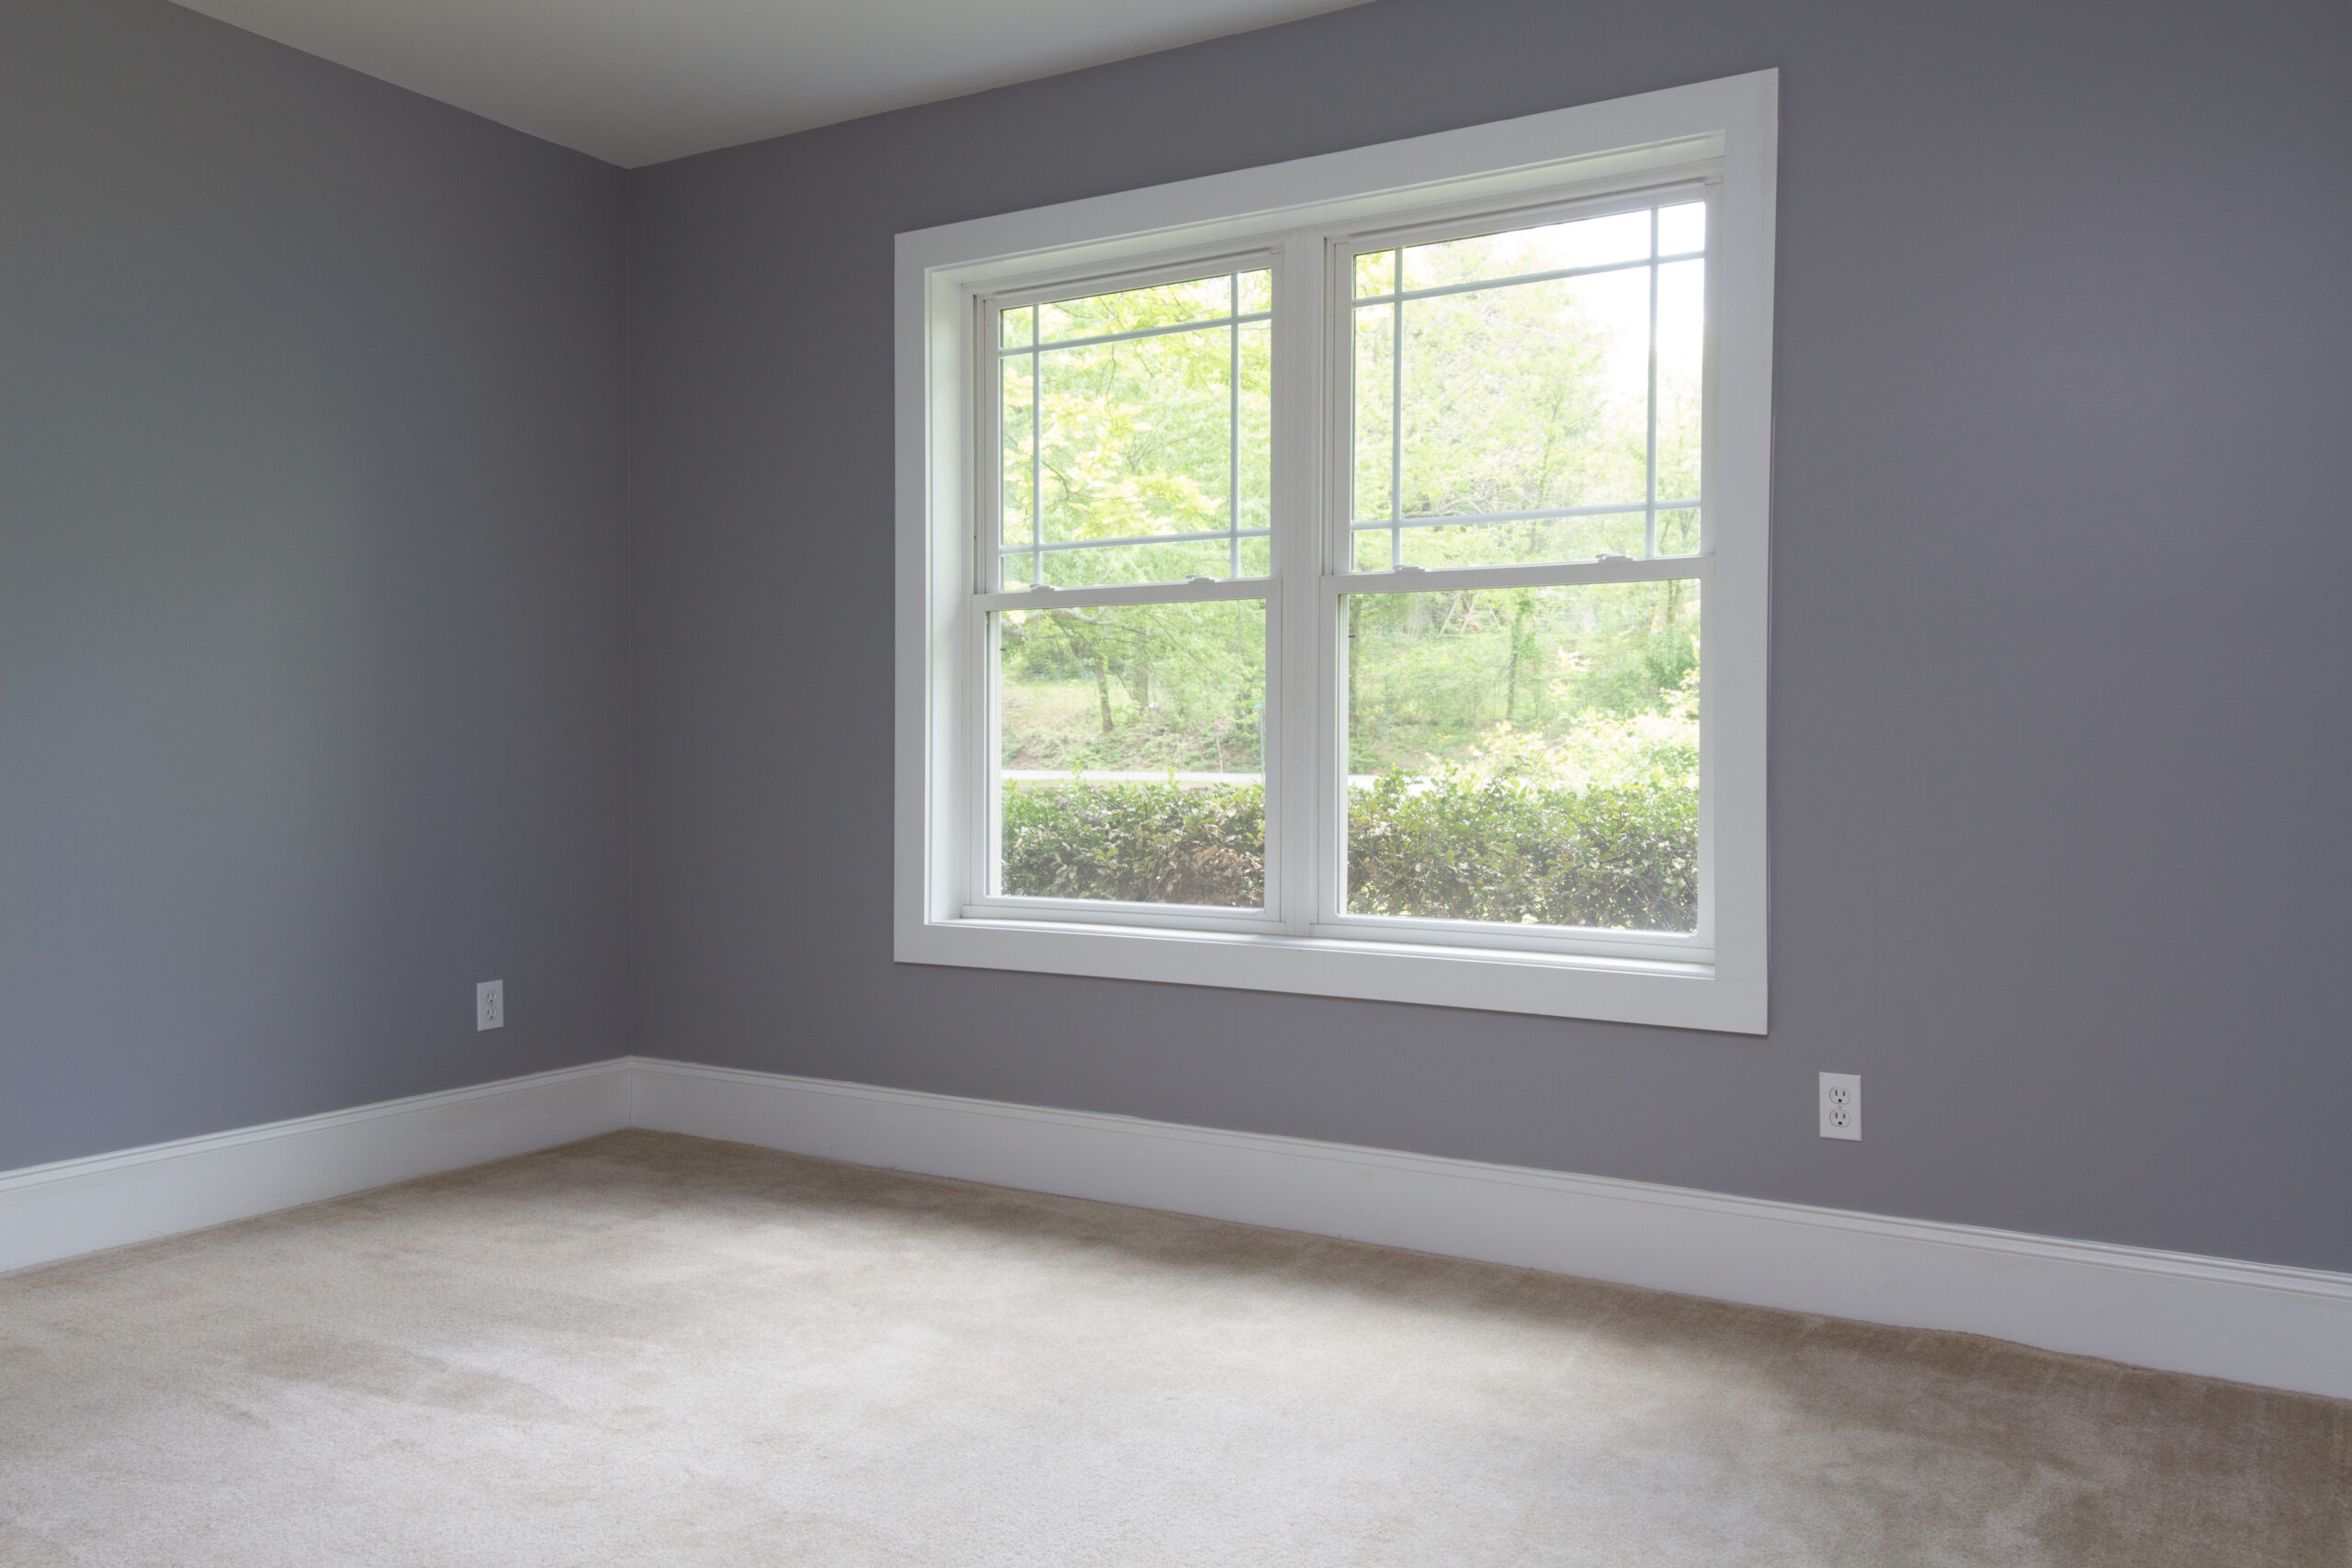 Double window in bedroom with carpet and gray walls